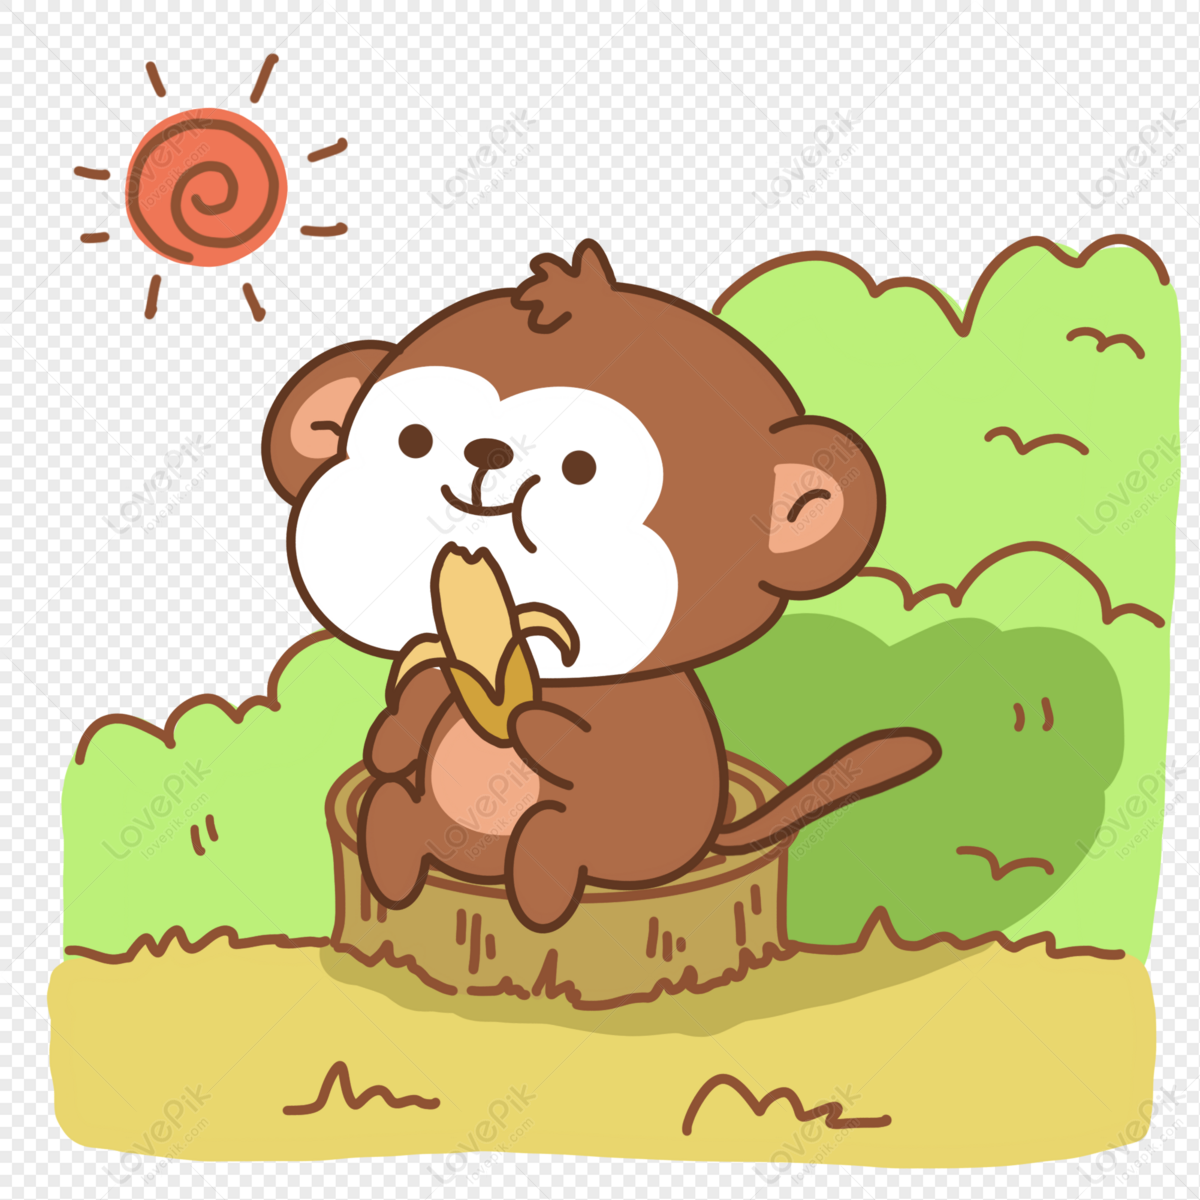 Monkey Eating Banana Free PNG And Clipart Image For Free Download - Lovepik  | 401352079